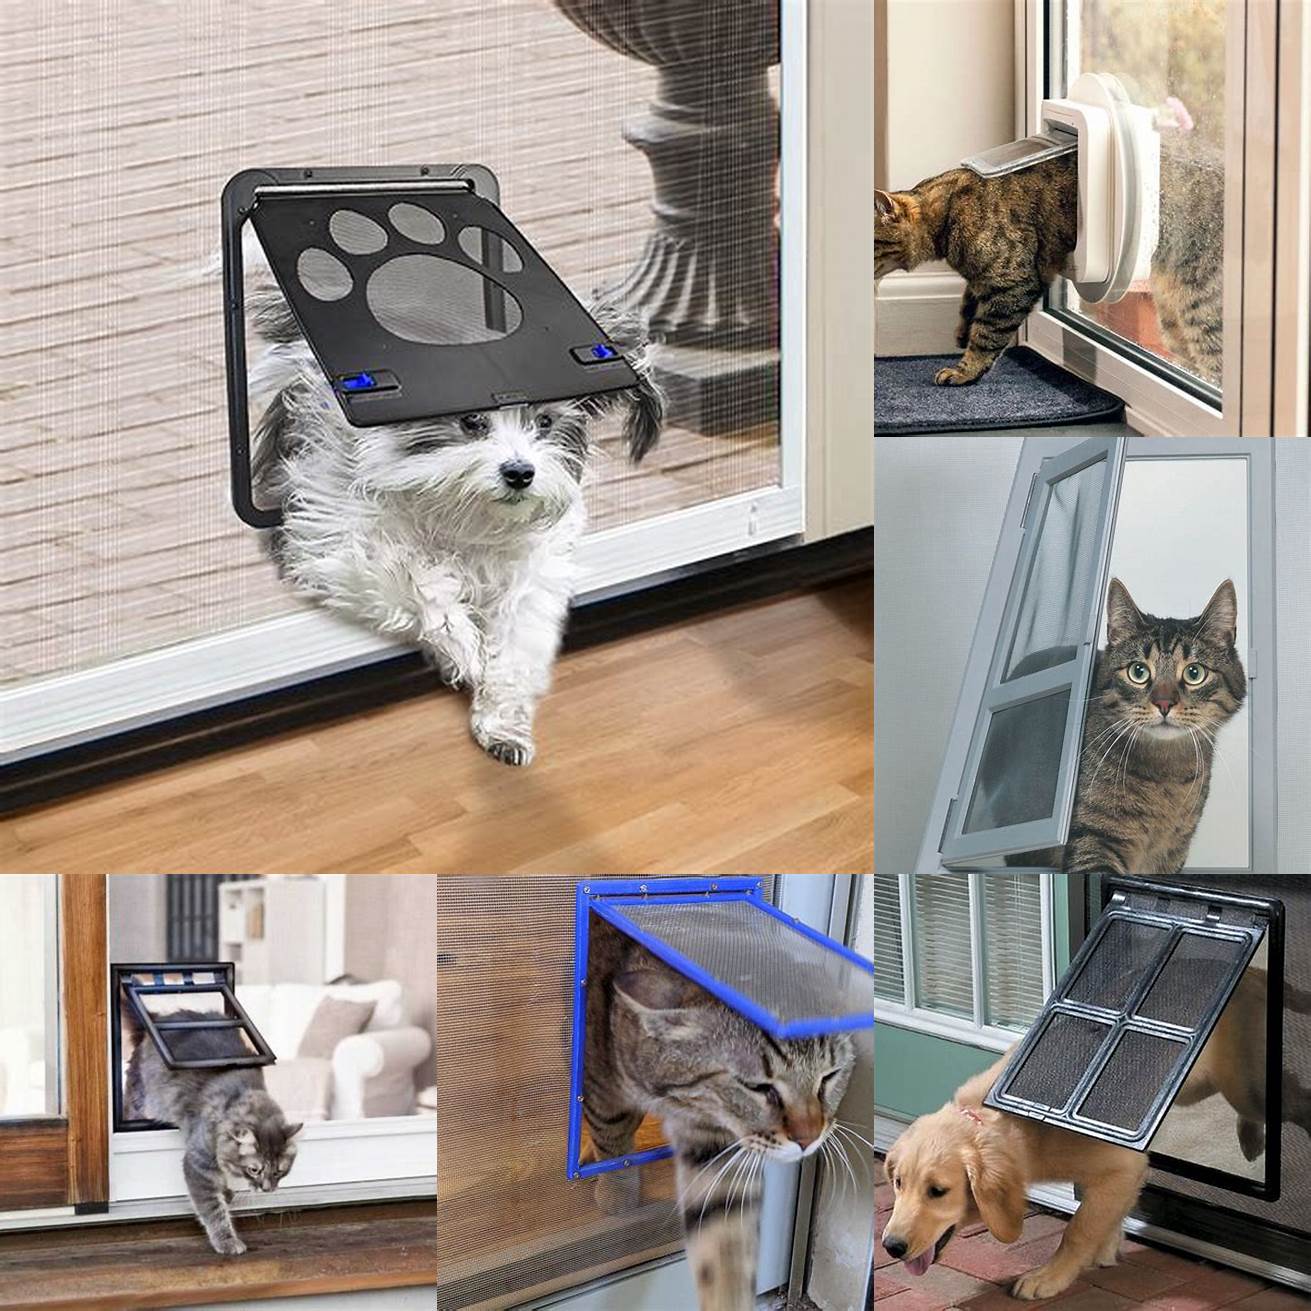 Convenience - With a cat door for screen you no longer have to be your cats doorman Your cat can come and go as they please allowing you to focus on other things